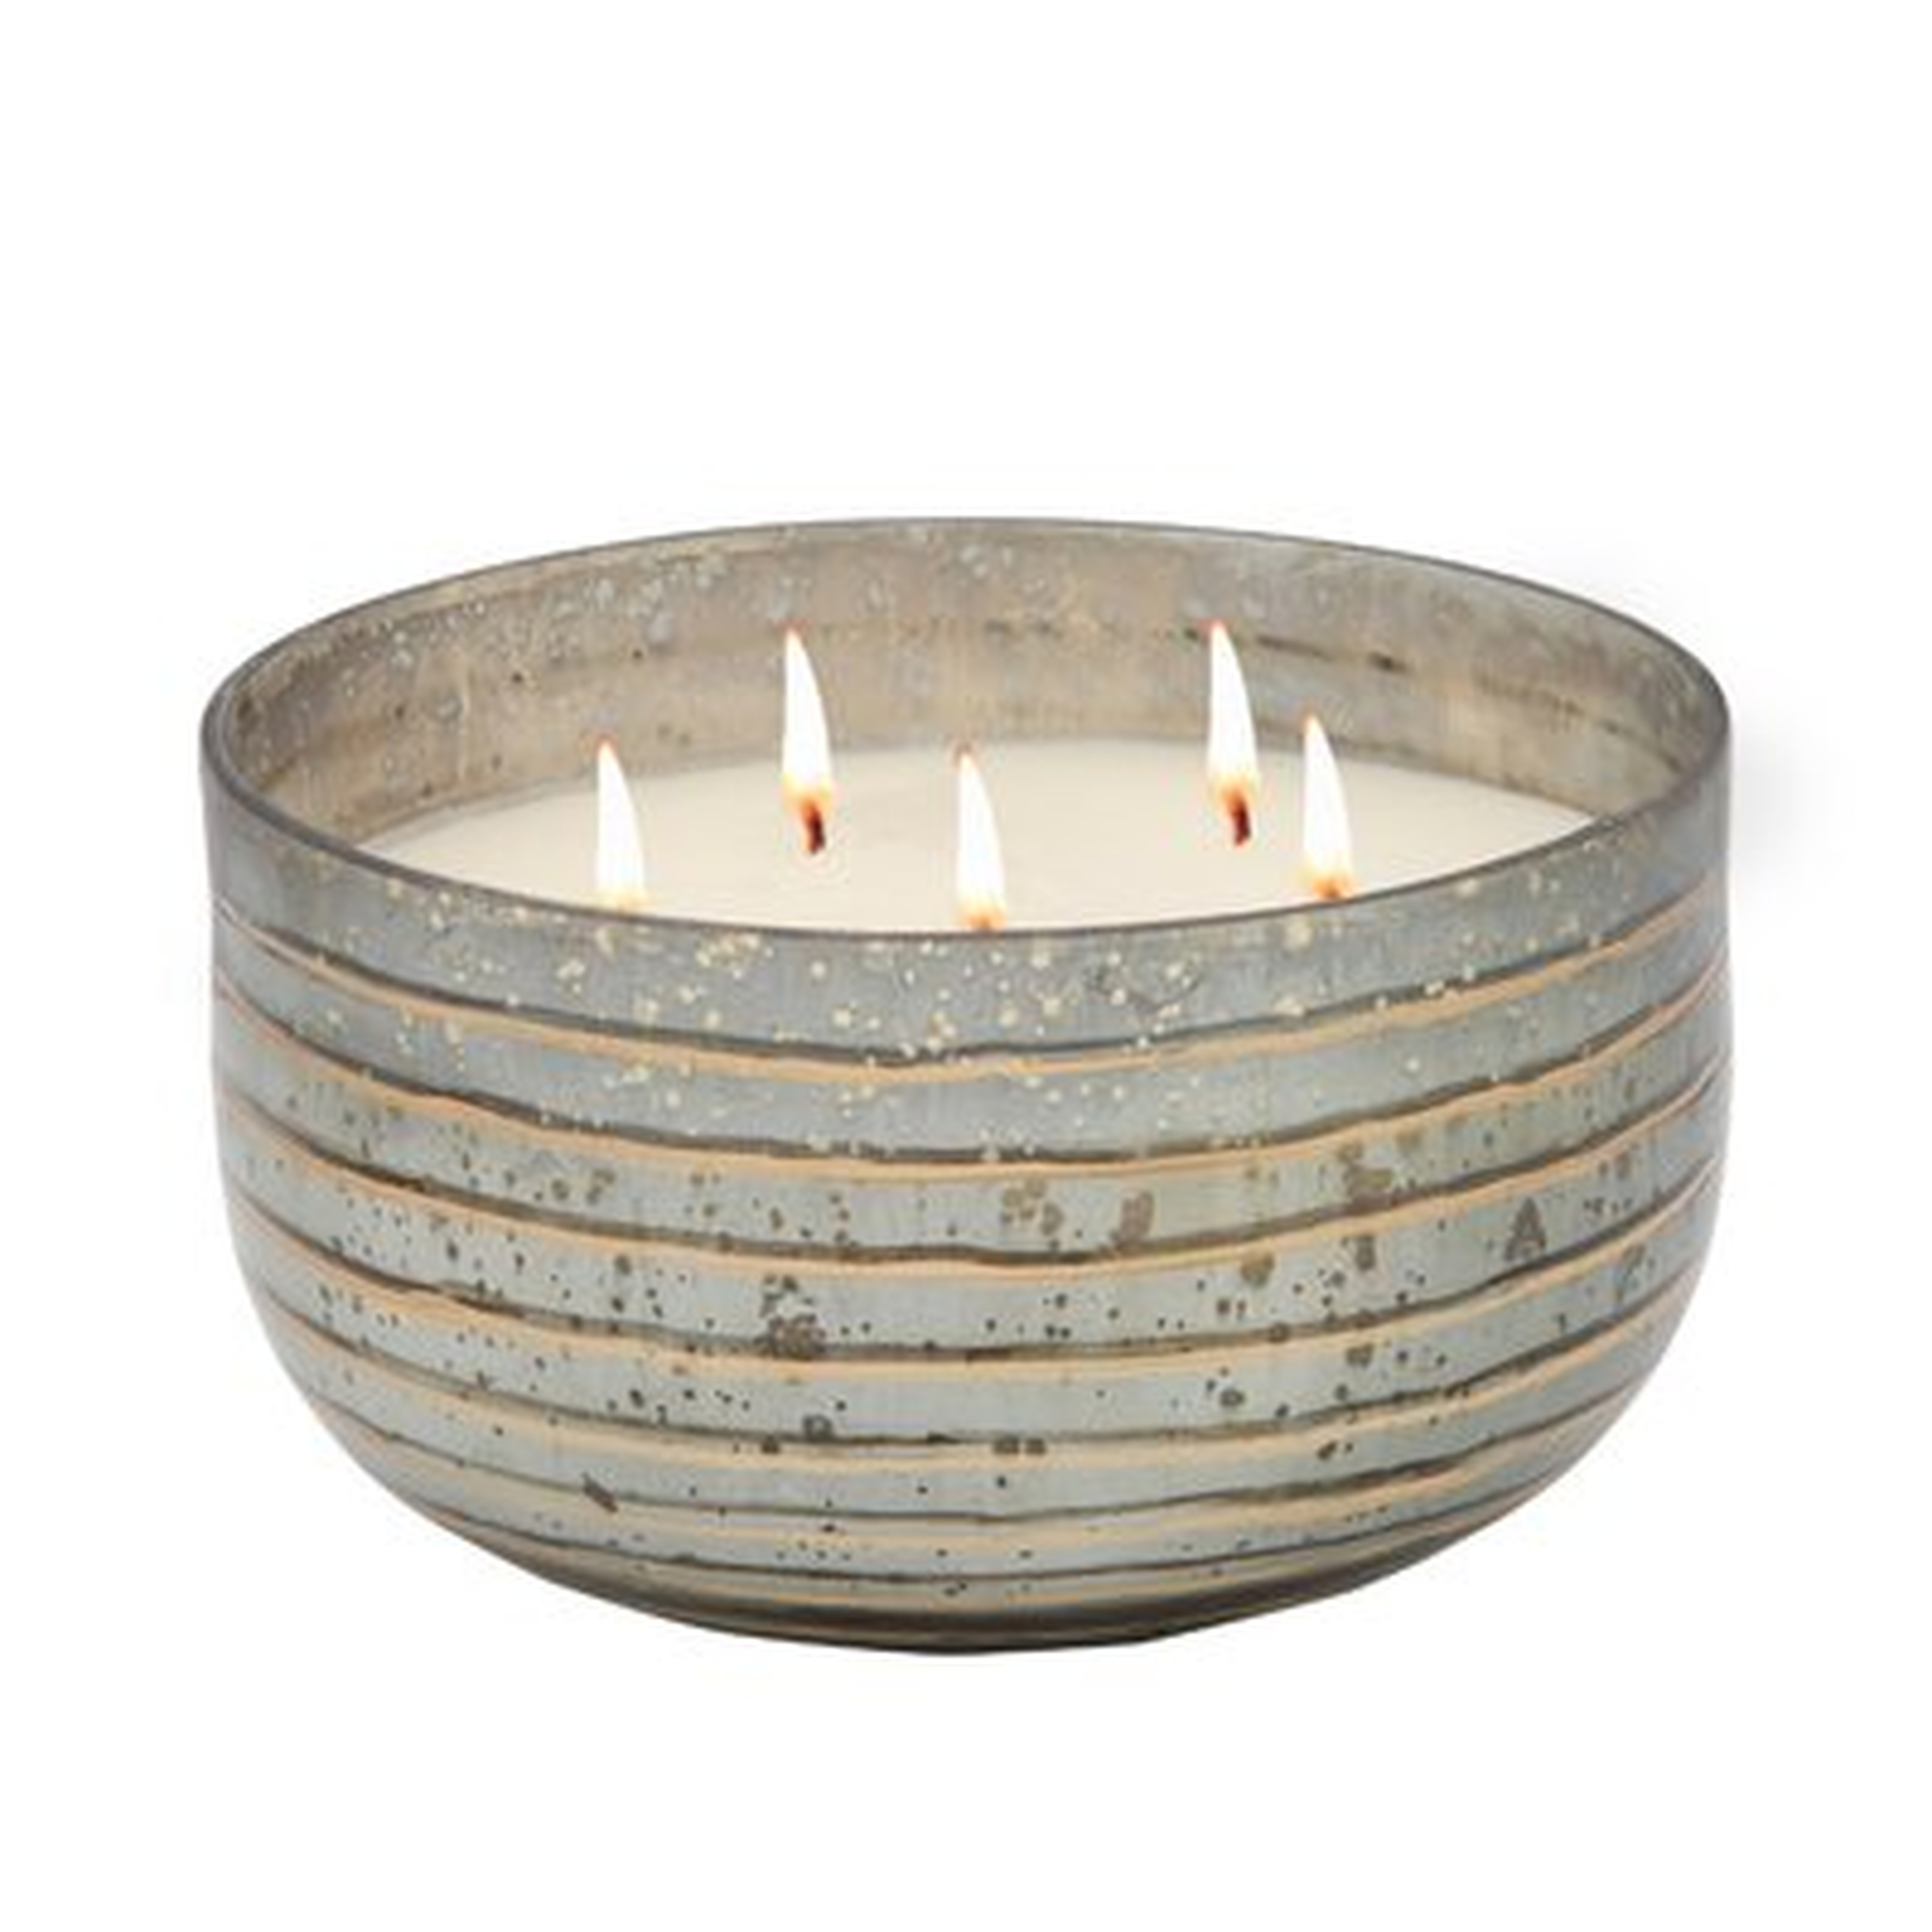 French Vanilla Scented Jar Candle - Wayfair